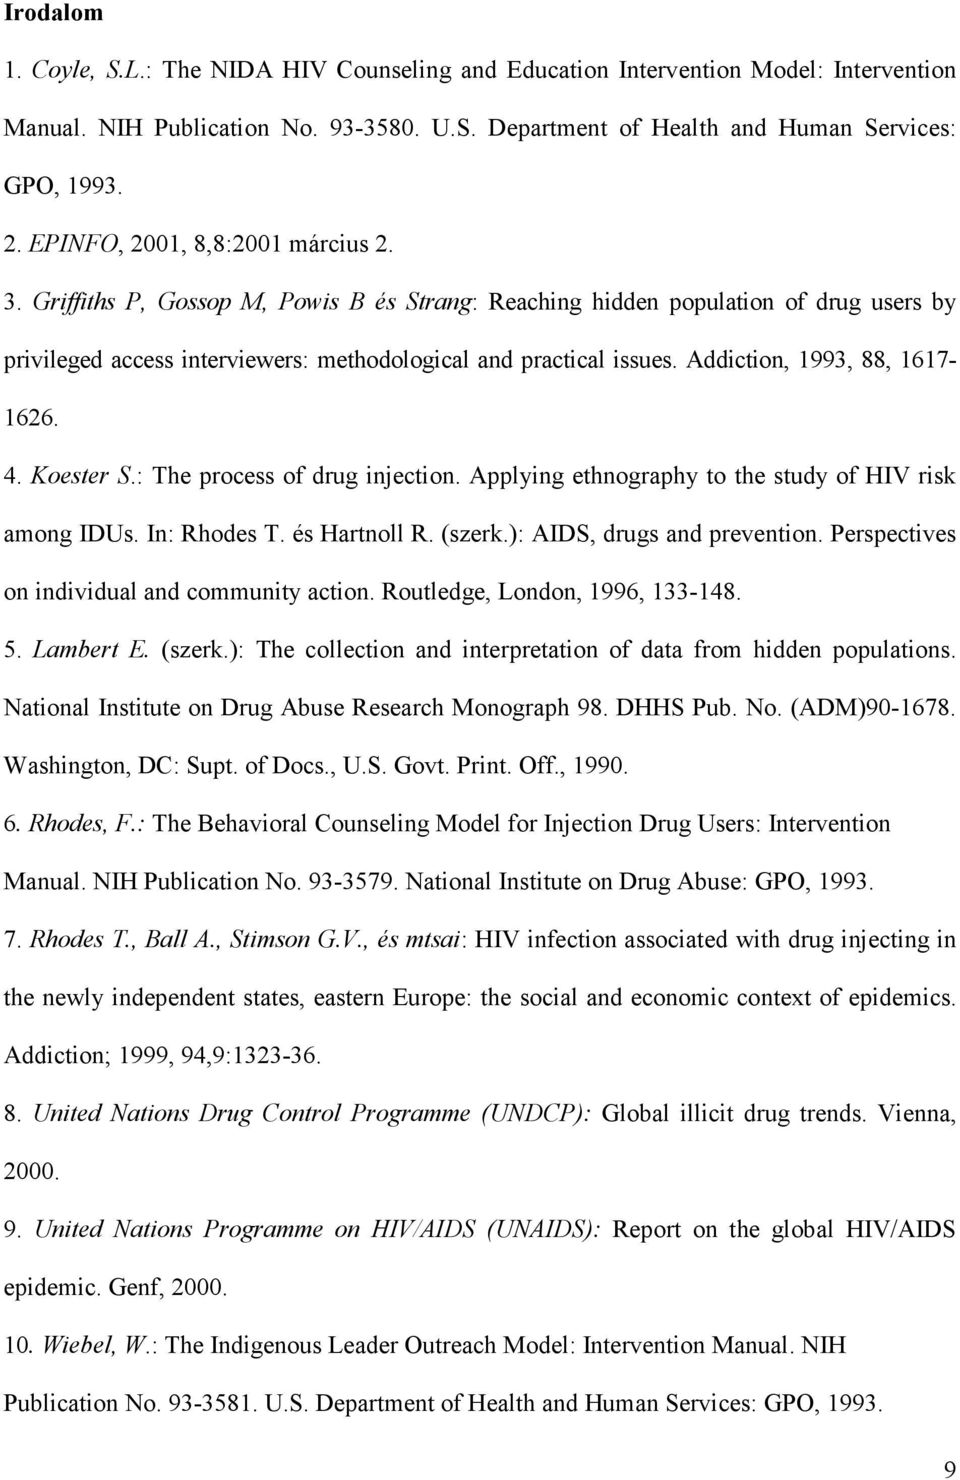 Addiction, 1993, 88, 1617-1626. 4. Koester S.: The process of drug injection. Applying ethnography to the study of HIV risk among IDUs. In: Rhodes T. és Hartnoll R. (szerk.